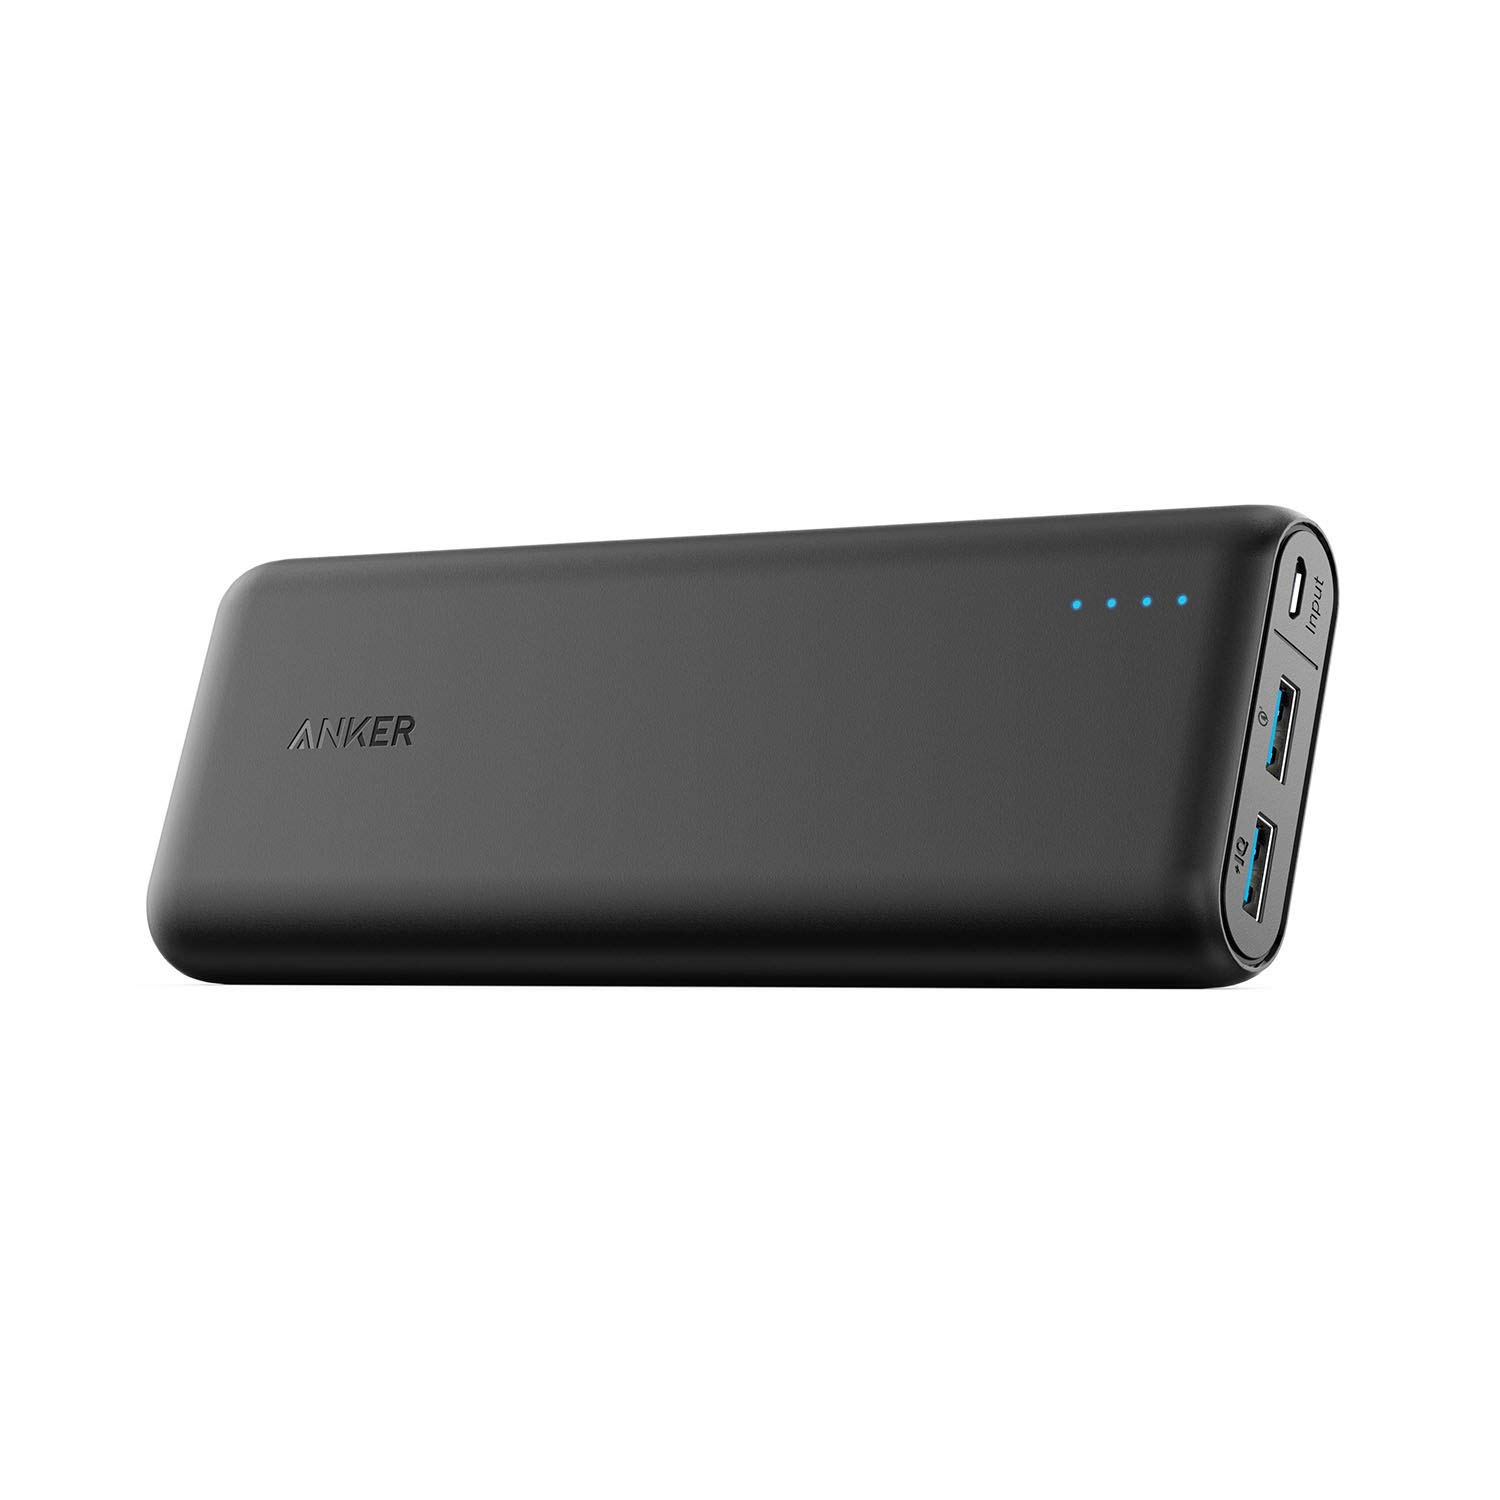 Anker PowerCore Speed Quick Charge 3.0 & PowerIQ Portable Charger, - A1278H11 allmytech.pk